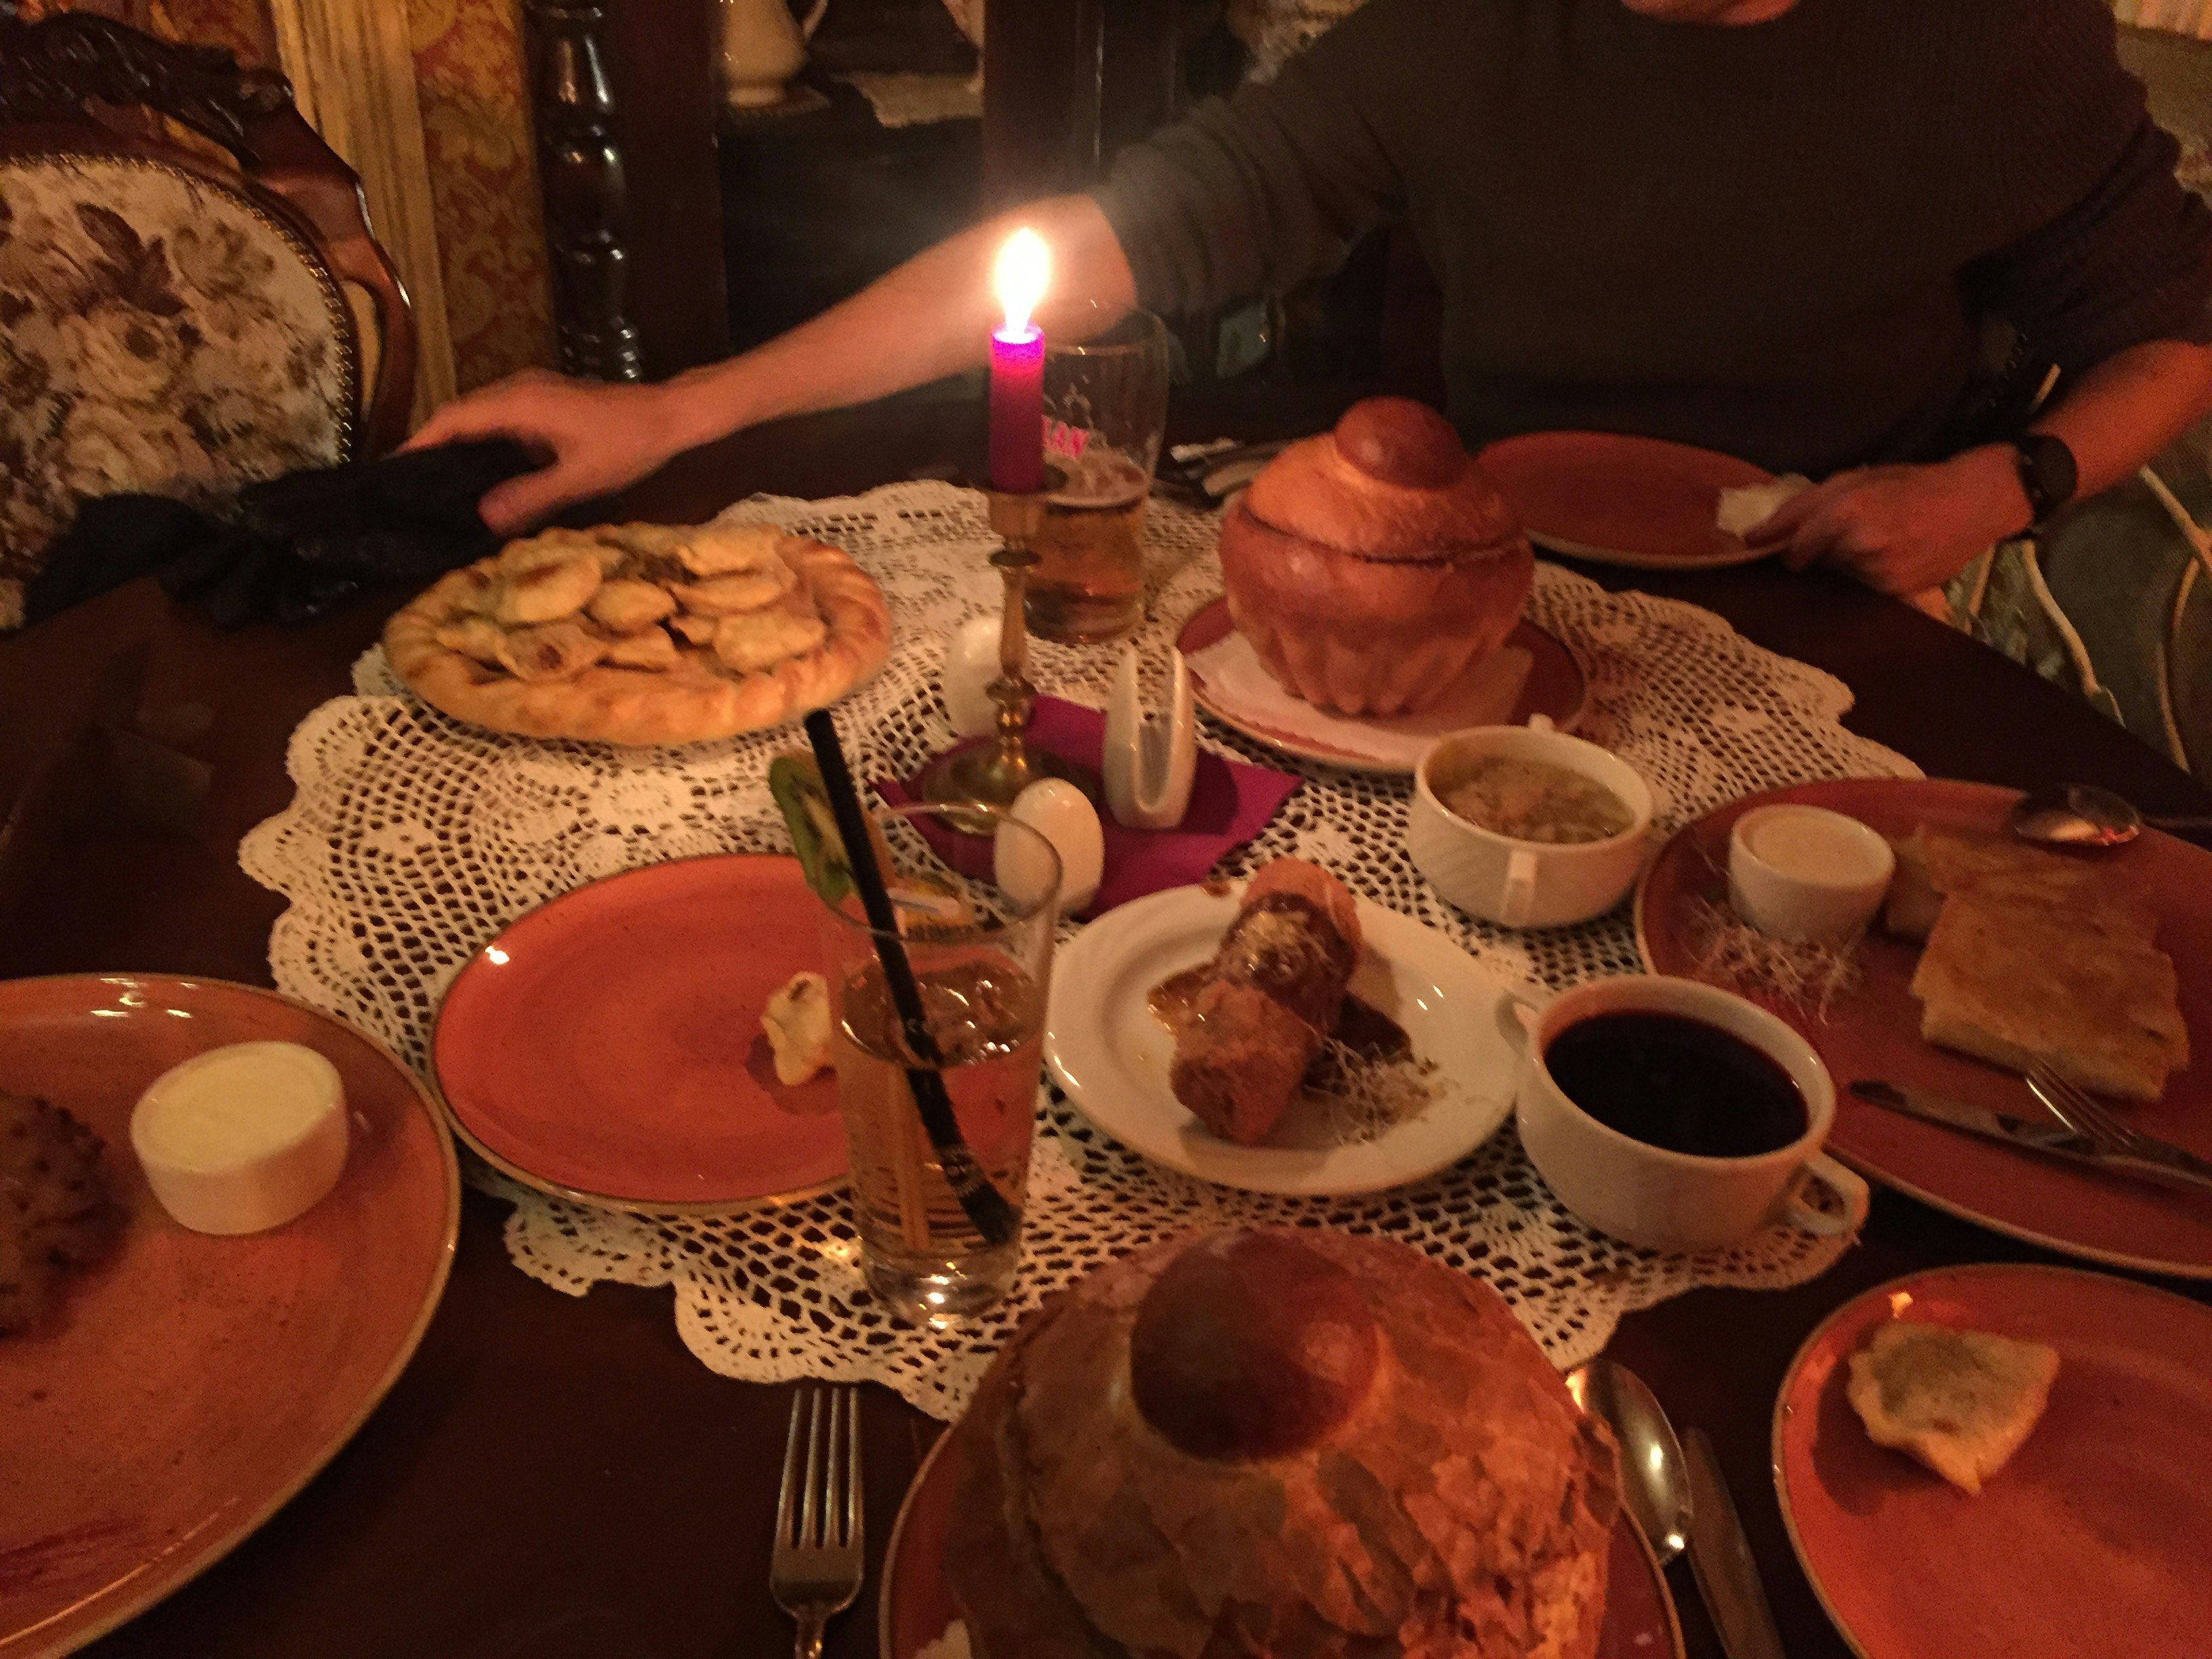 Several plates in a dimly lit room, included bread bowls and pancakes